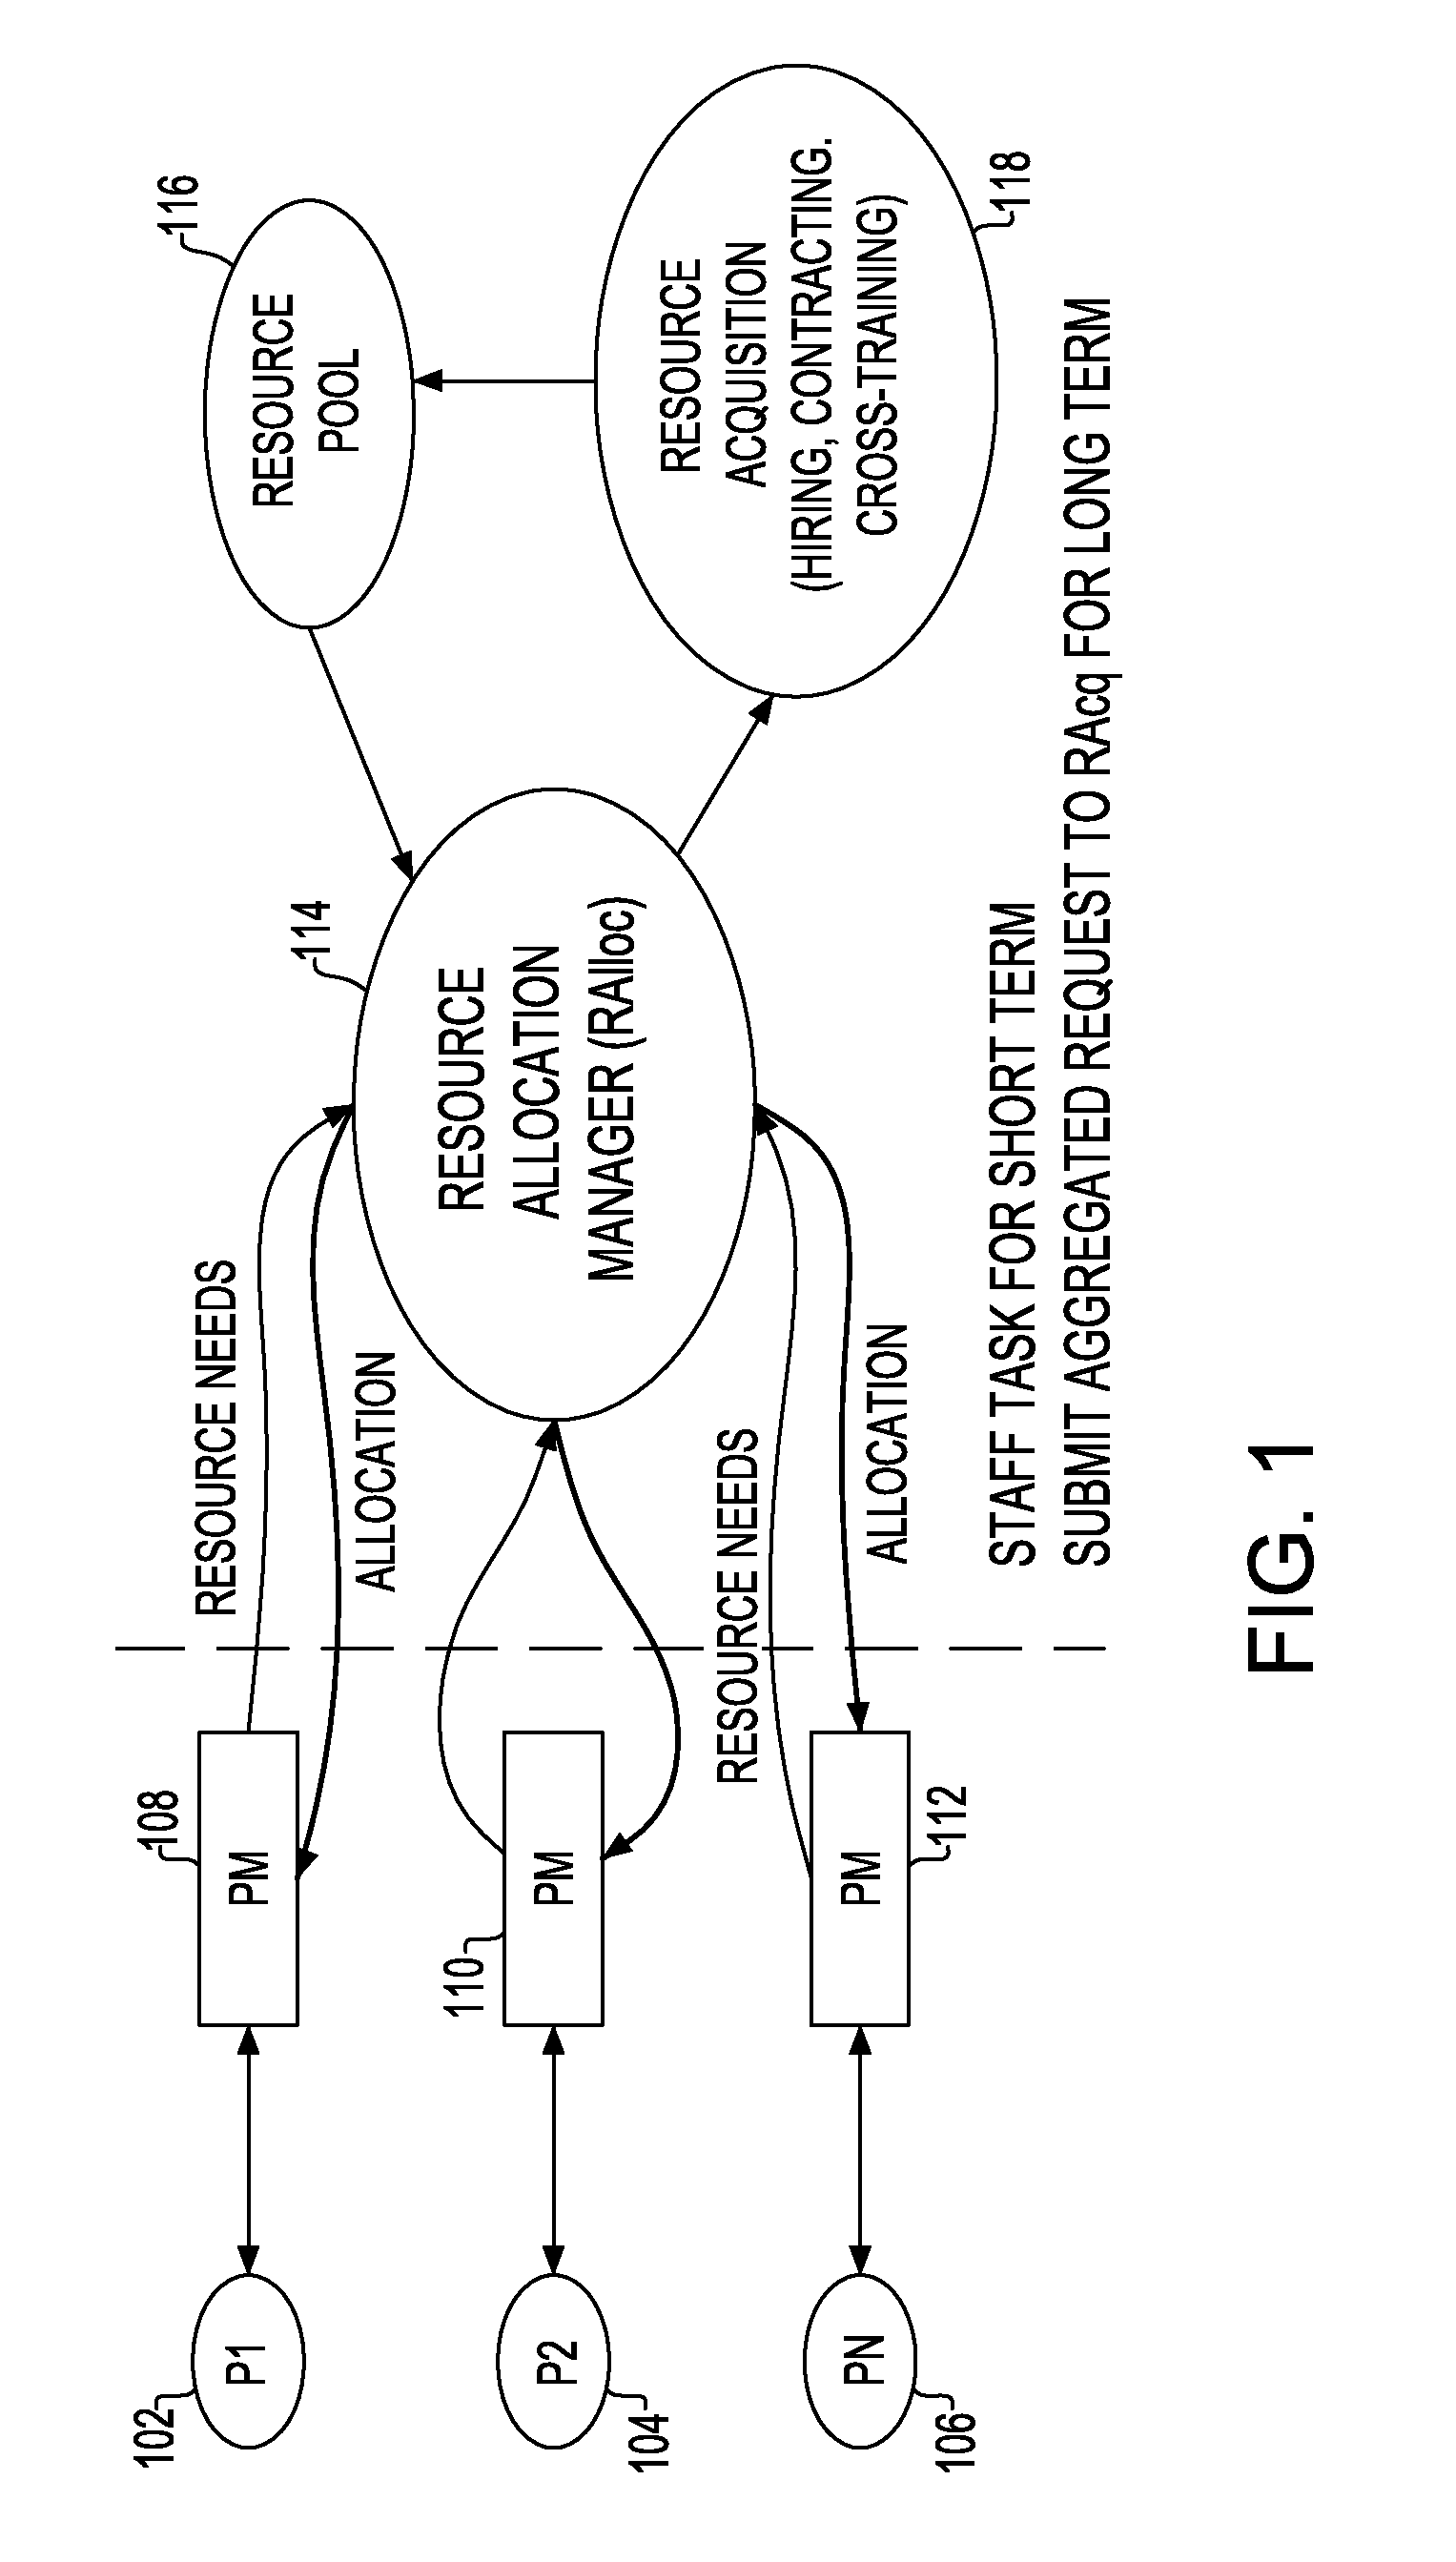 Method and system for integrated short-term activity resource staffing levels and long-term resource action planning for a portfolio of services projects